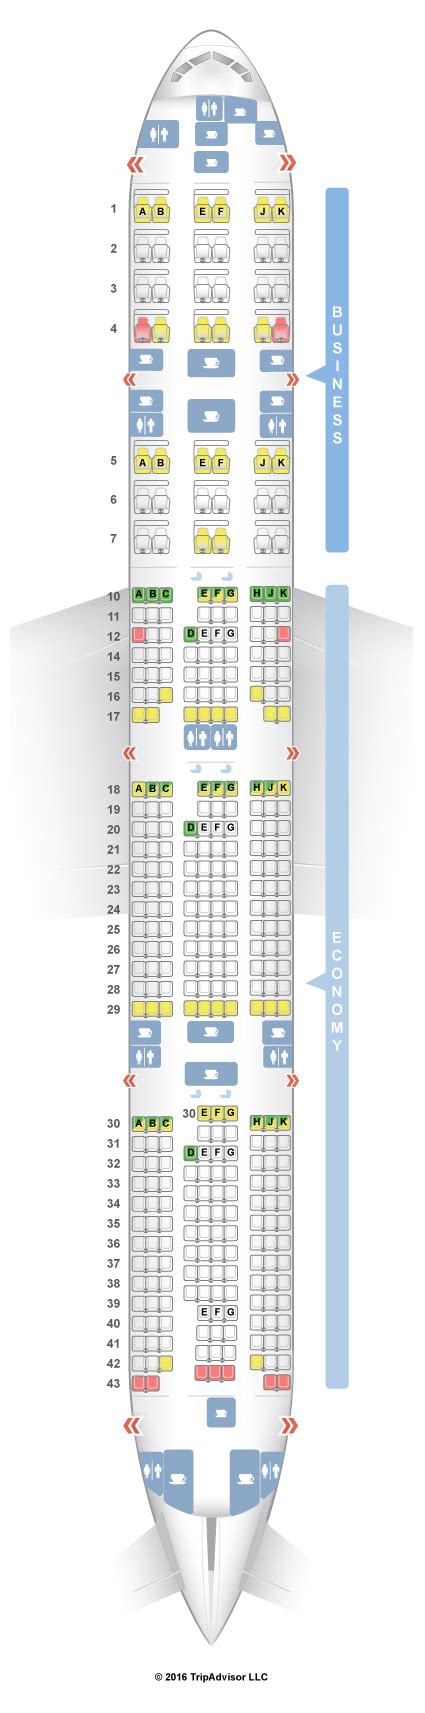 Seat map for qatar airways. For your next Qatar Airways flight, use this seating chart to get the most comfortable seats, legroom, and recline on . Qatar Airways Airbus A330-300 (333) Layout 1. Note: There are 2 versions of this aircraft. Seat Map; Info; … 